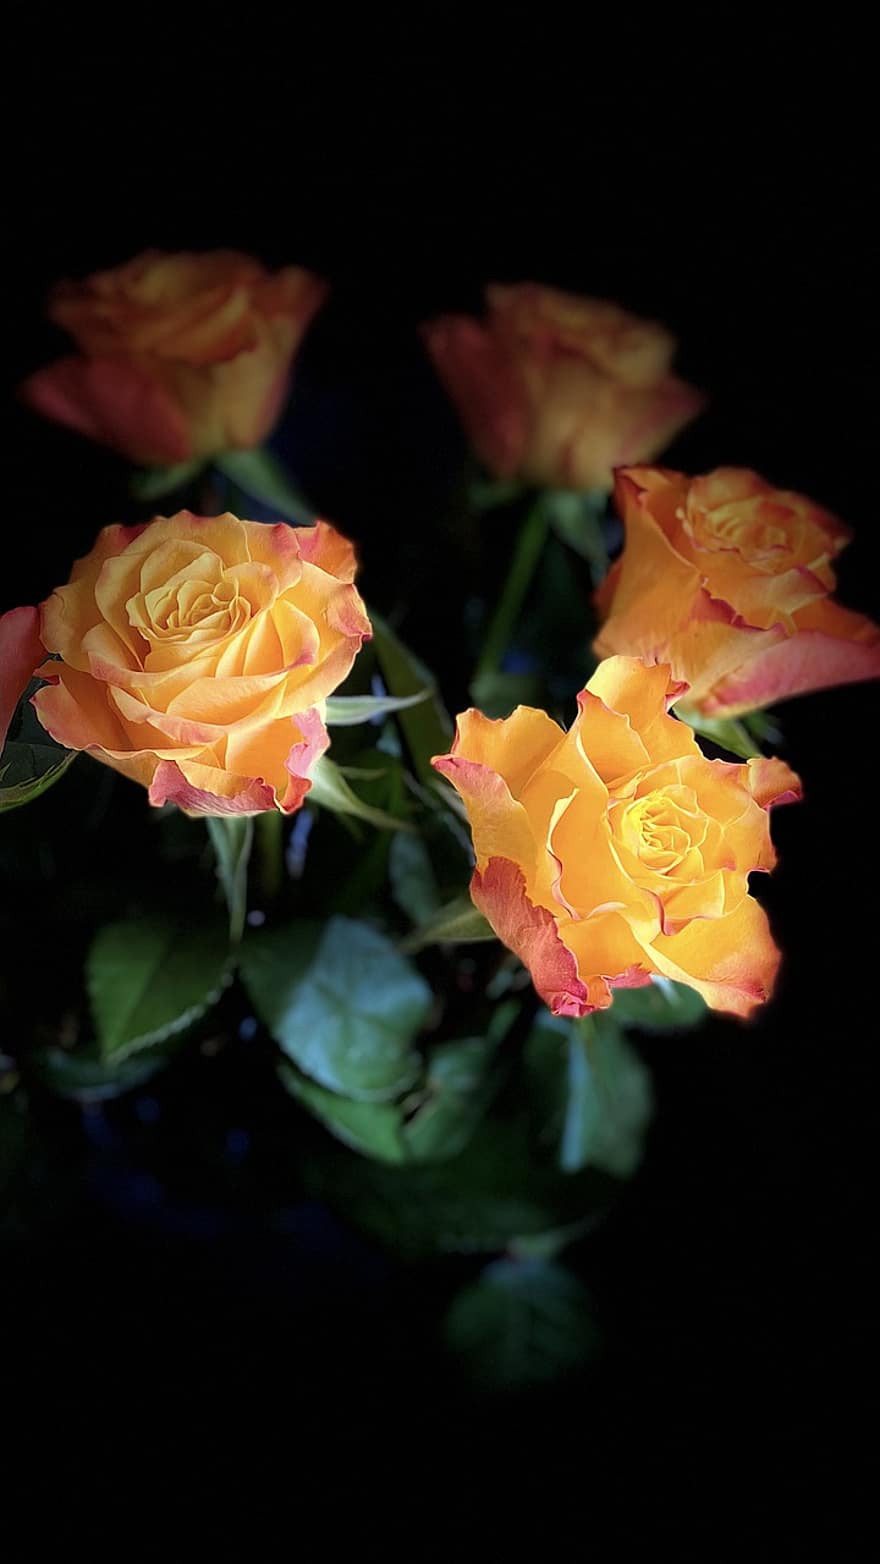 Roses, Flowers, Plant, Yellow Roses, Bloom, Flora, Nature, petal, flower, leaf, close-up